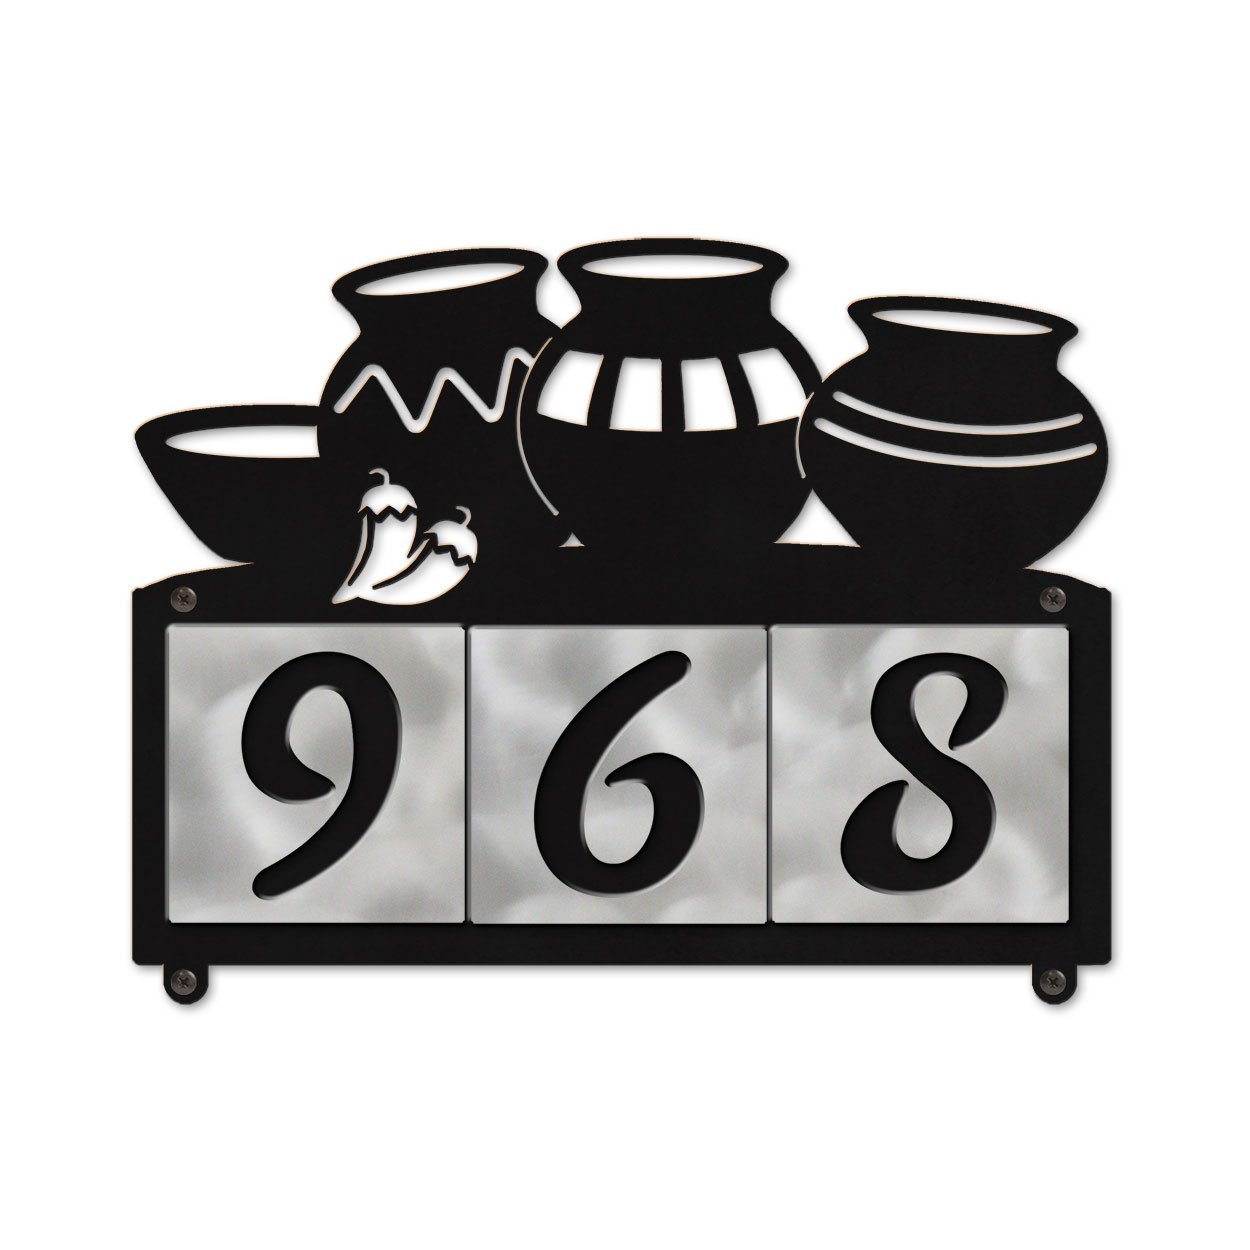 609053 - Chili Pots 3-Digit Horizontal 6in Tile House Numbers